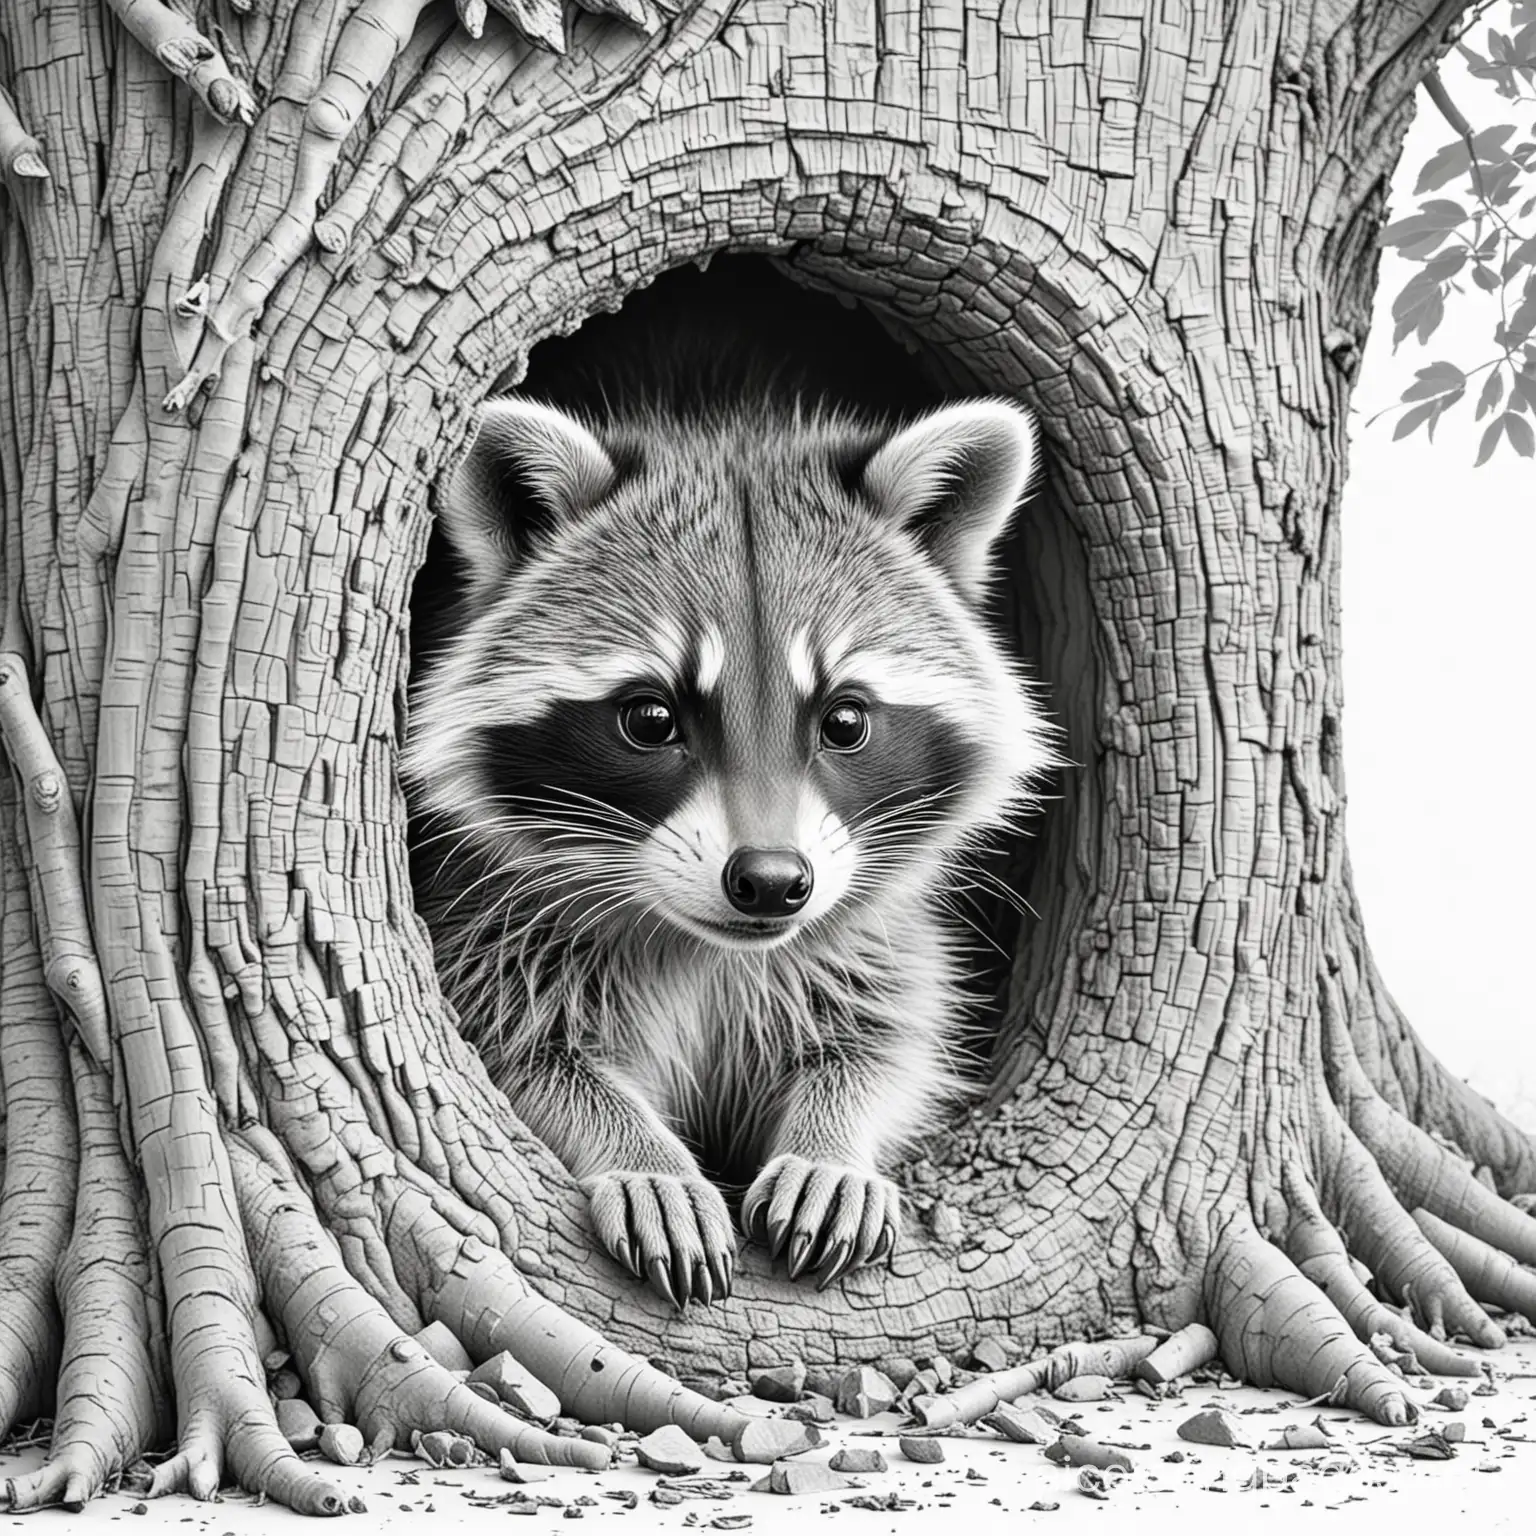 raccoon in hole of tree

, Coloring Page, black and white, line art, white background, Simplicity, Ample White Space. The background of the coloring page is plain white to make it easy for young children to color within the lines. The outlines of all the subjects are easy to distinguish, making it simple for kids to color without too much difficulty